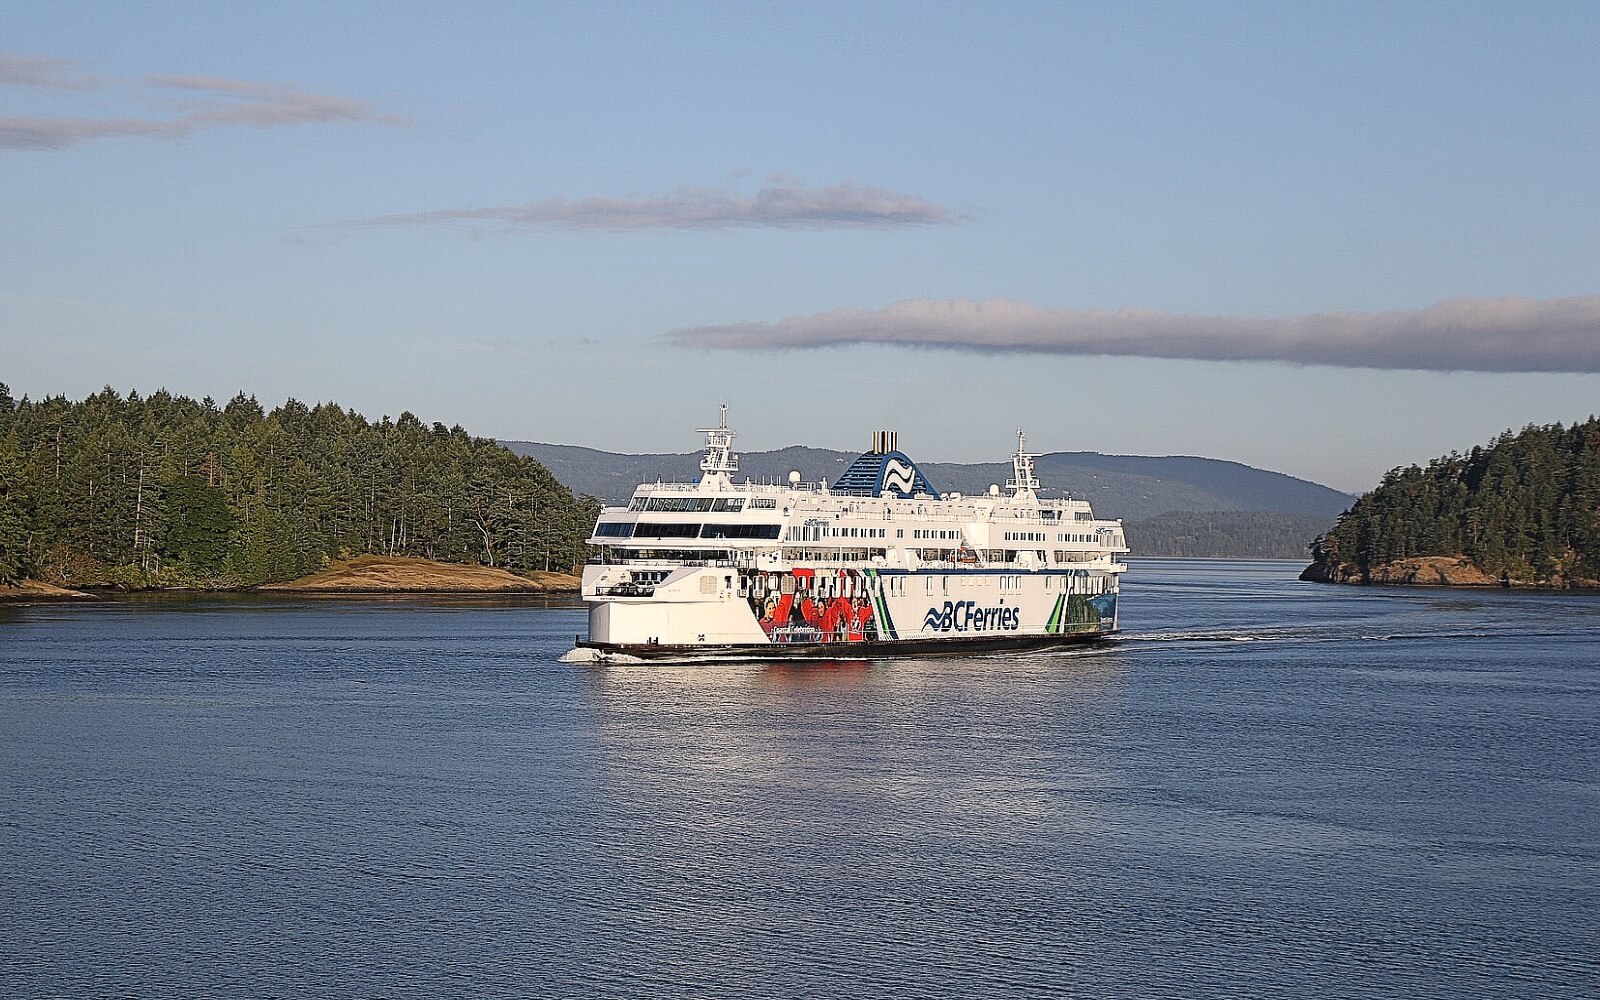 A BC Ferry ships comes into port